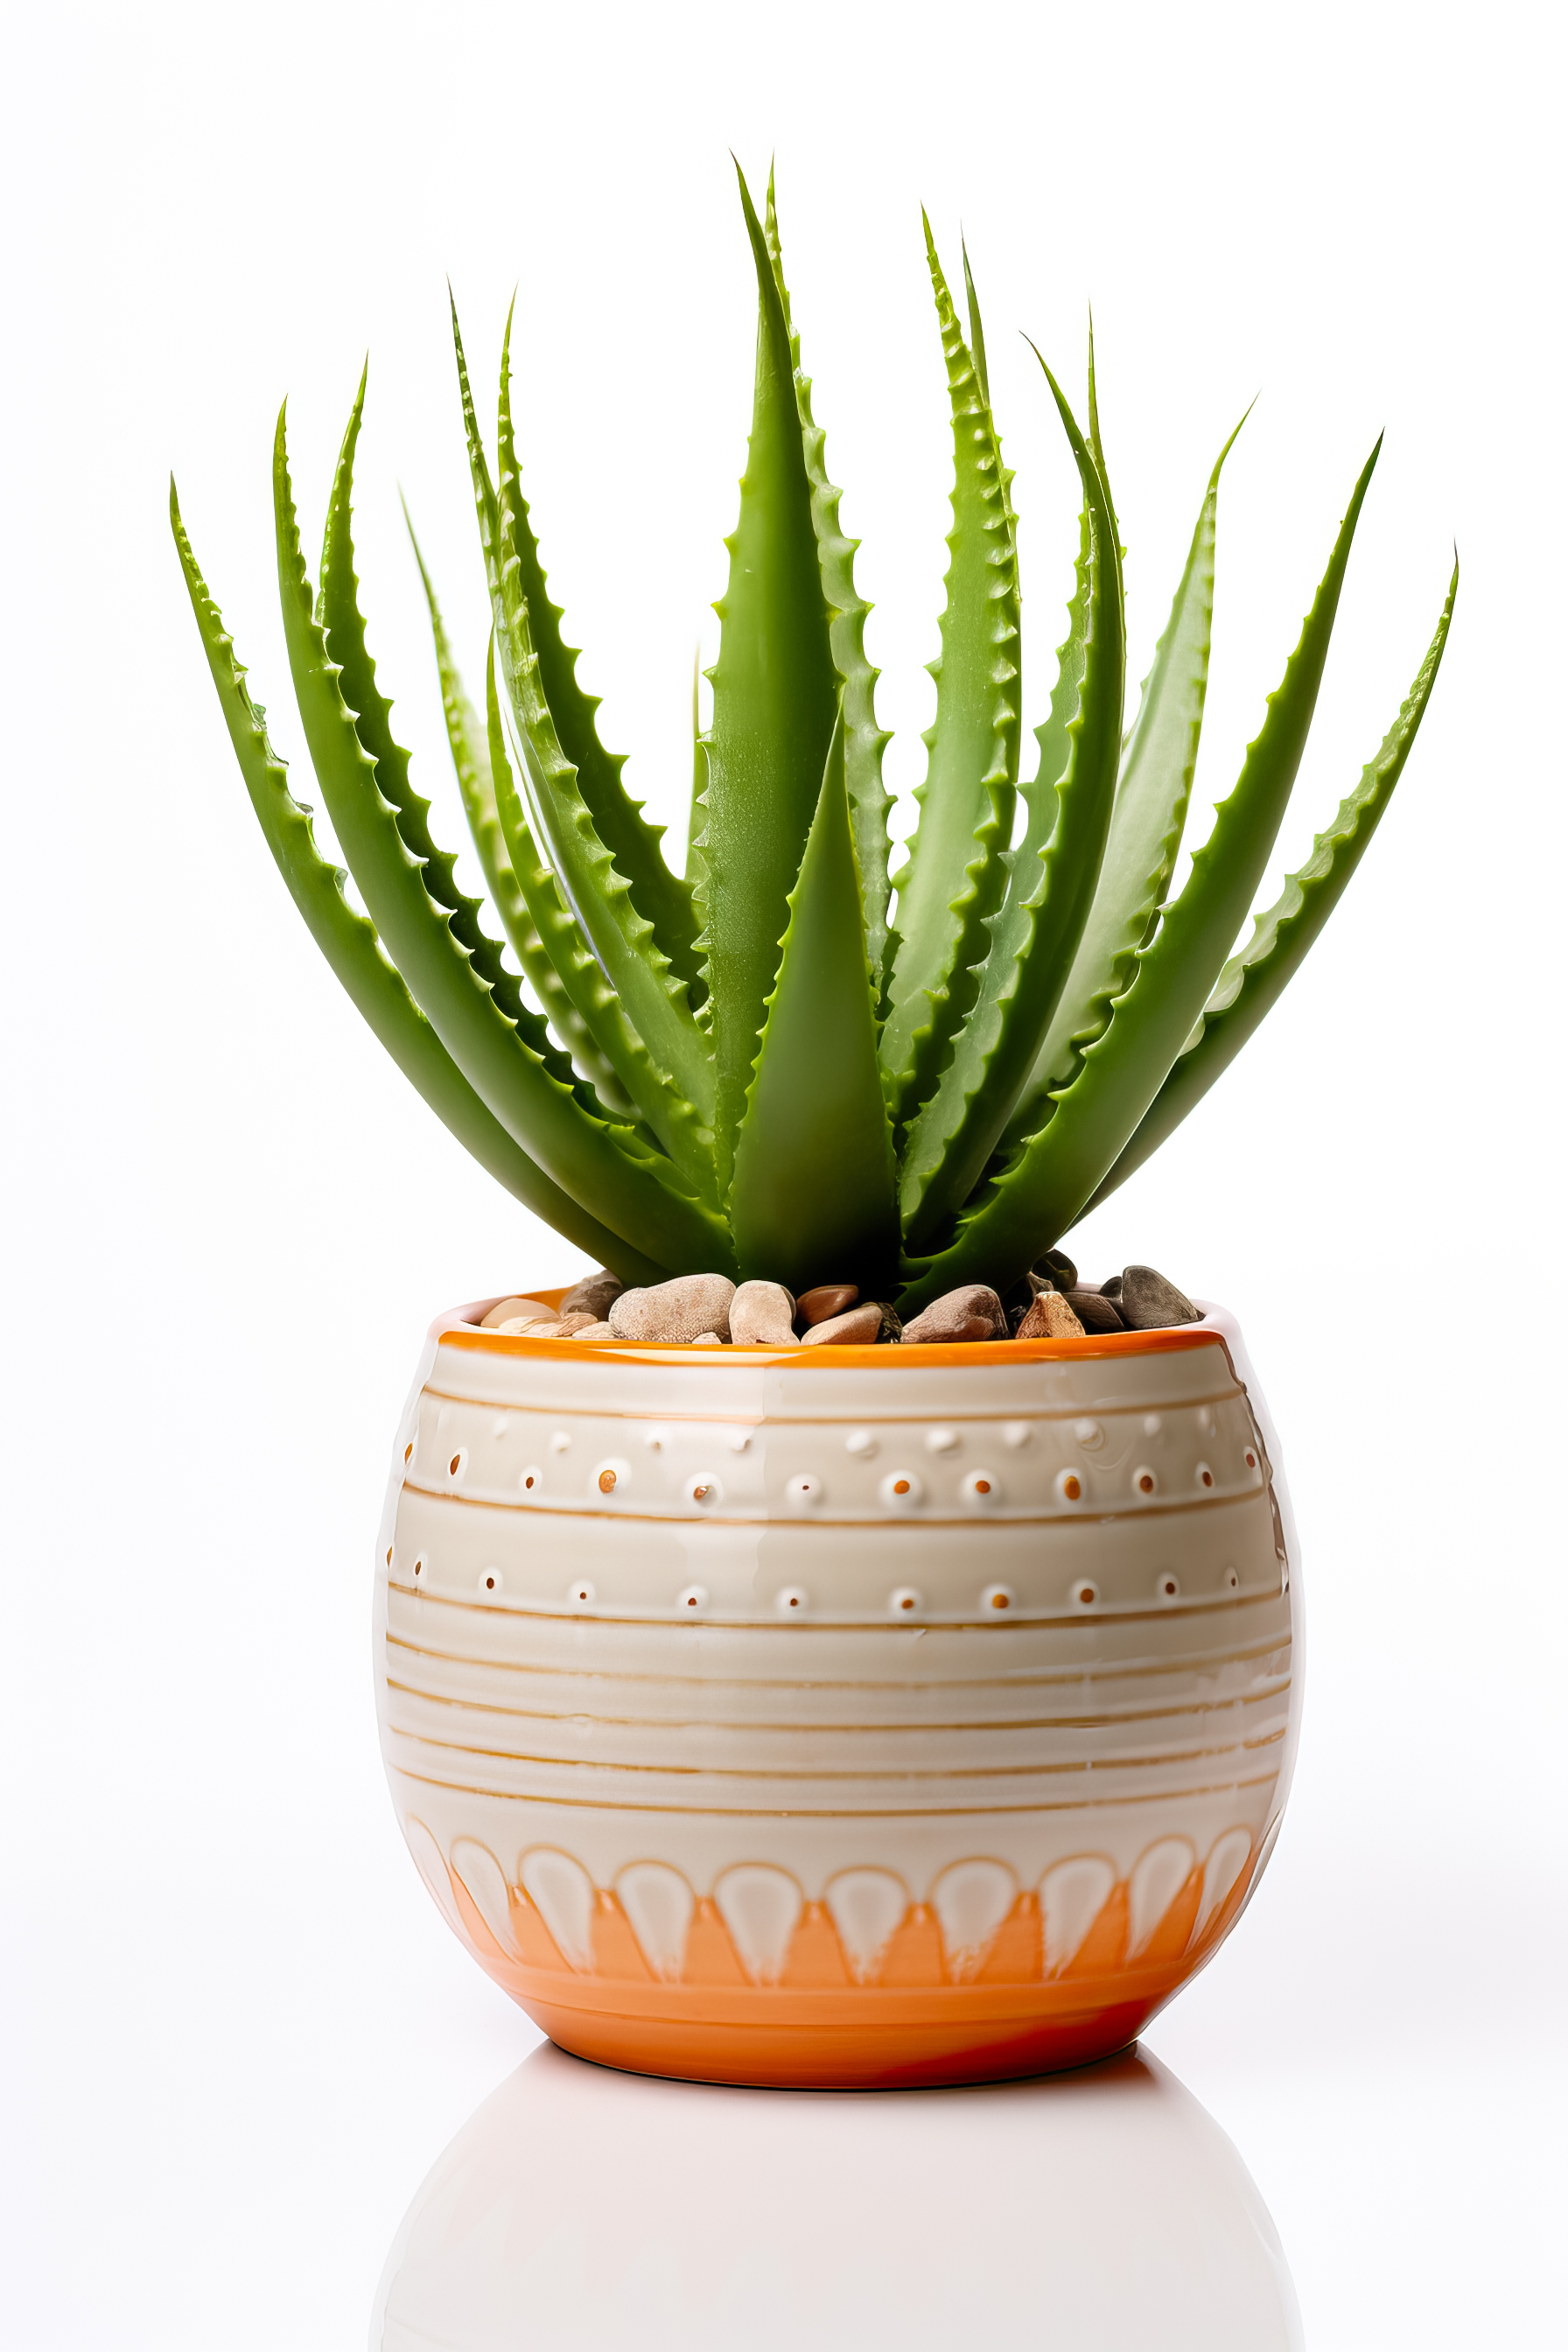 Healthy Aloe Vera plant with healing properties, adding natural charm to bedroom decor.